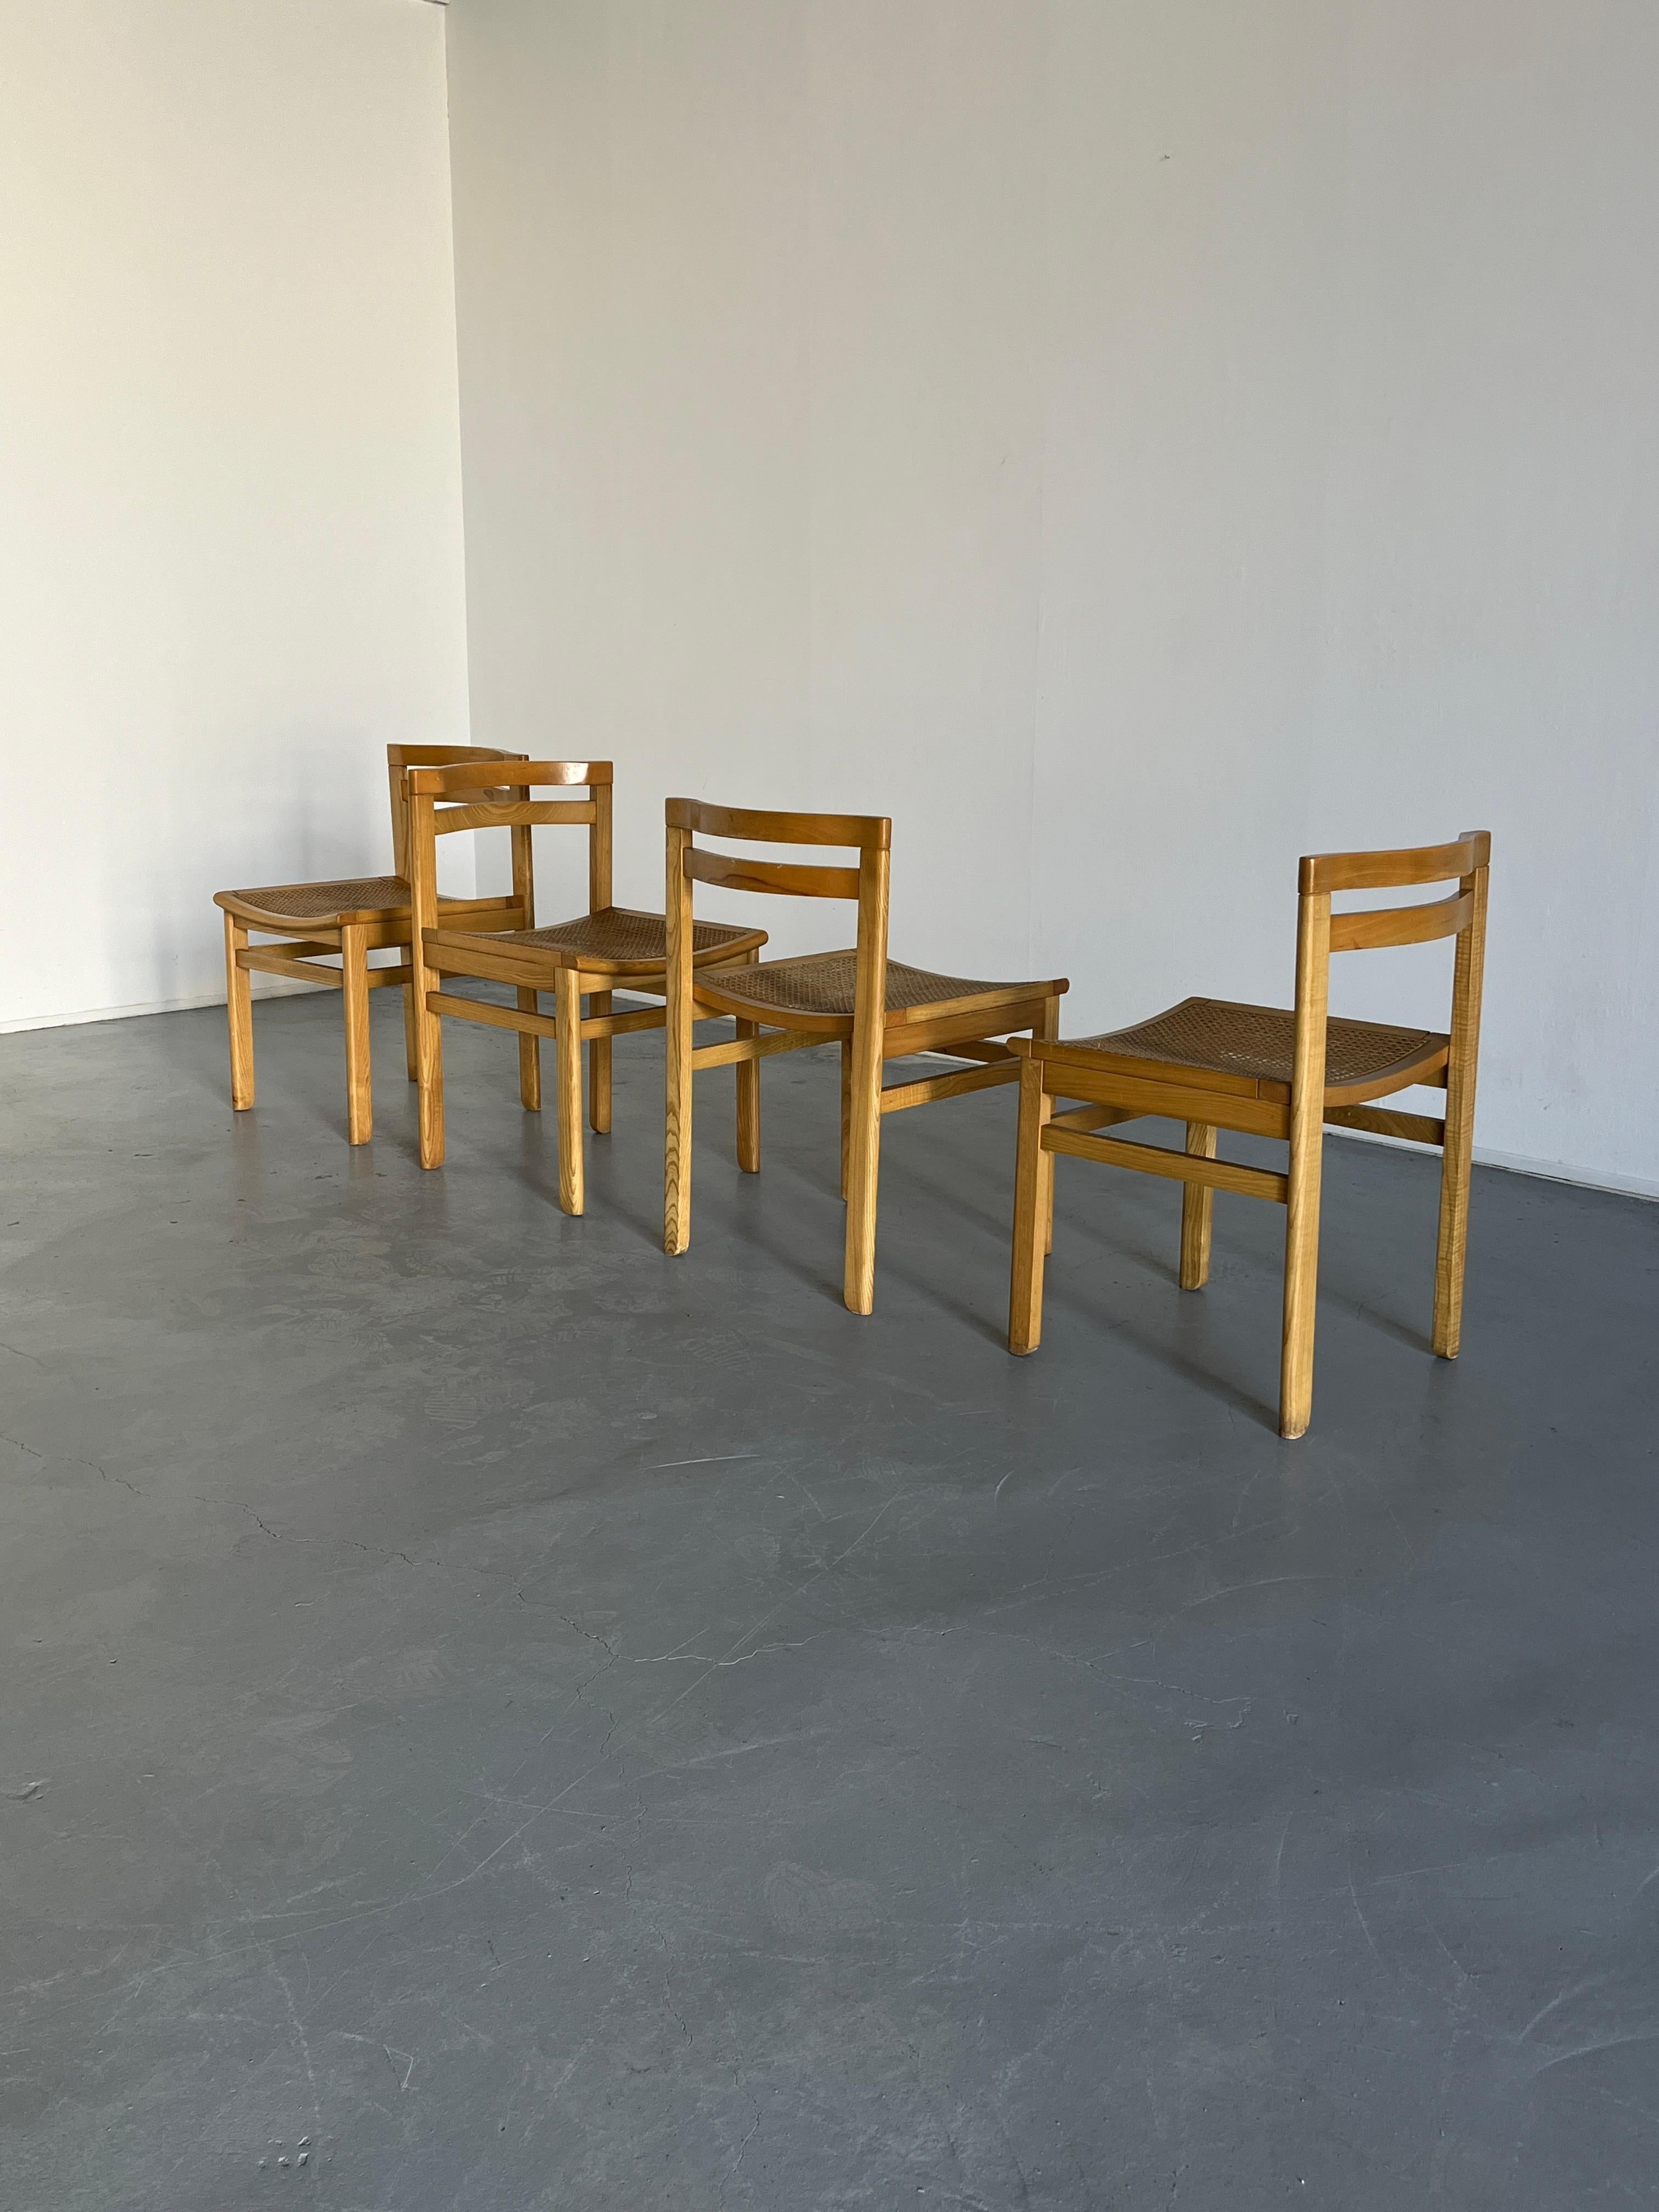 Set of 4 Mid-Century Modern Constructivist Wooden Dining Chairs in Beech, 1960s For Sale 1